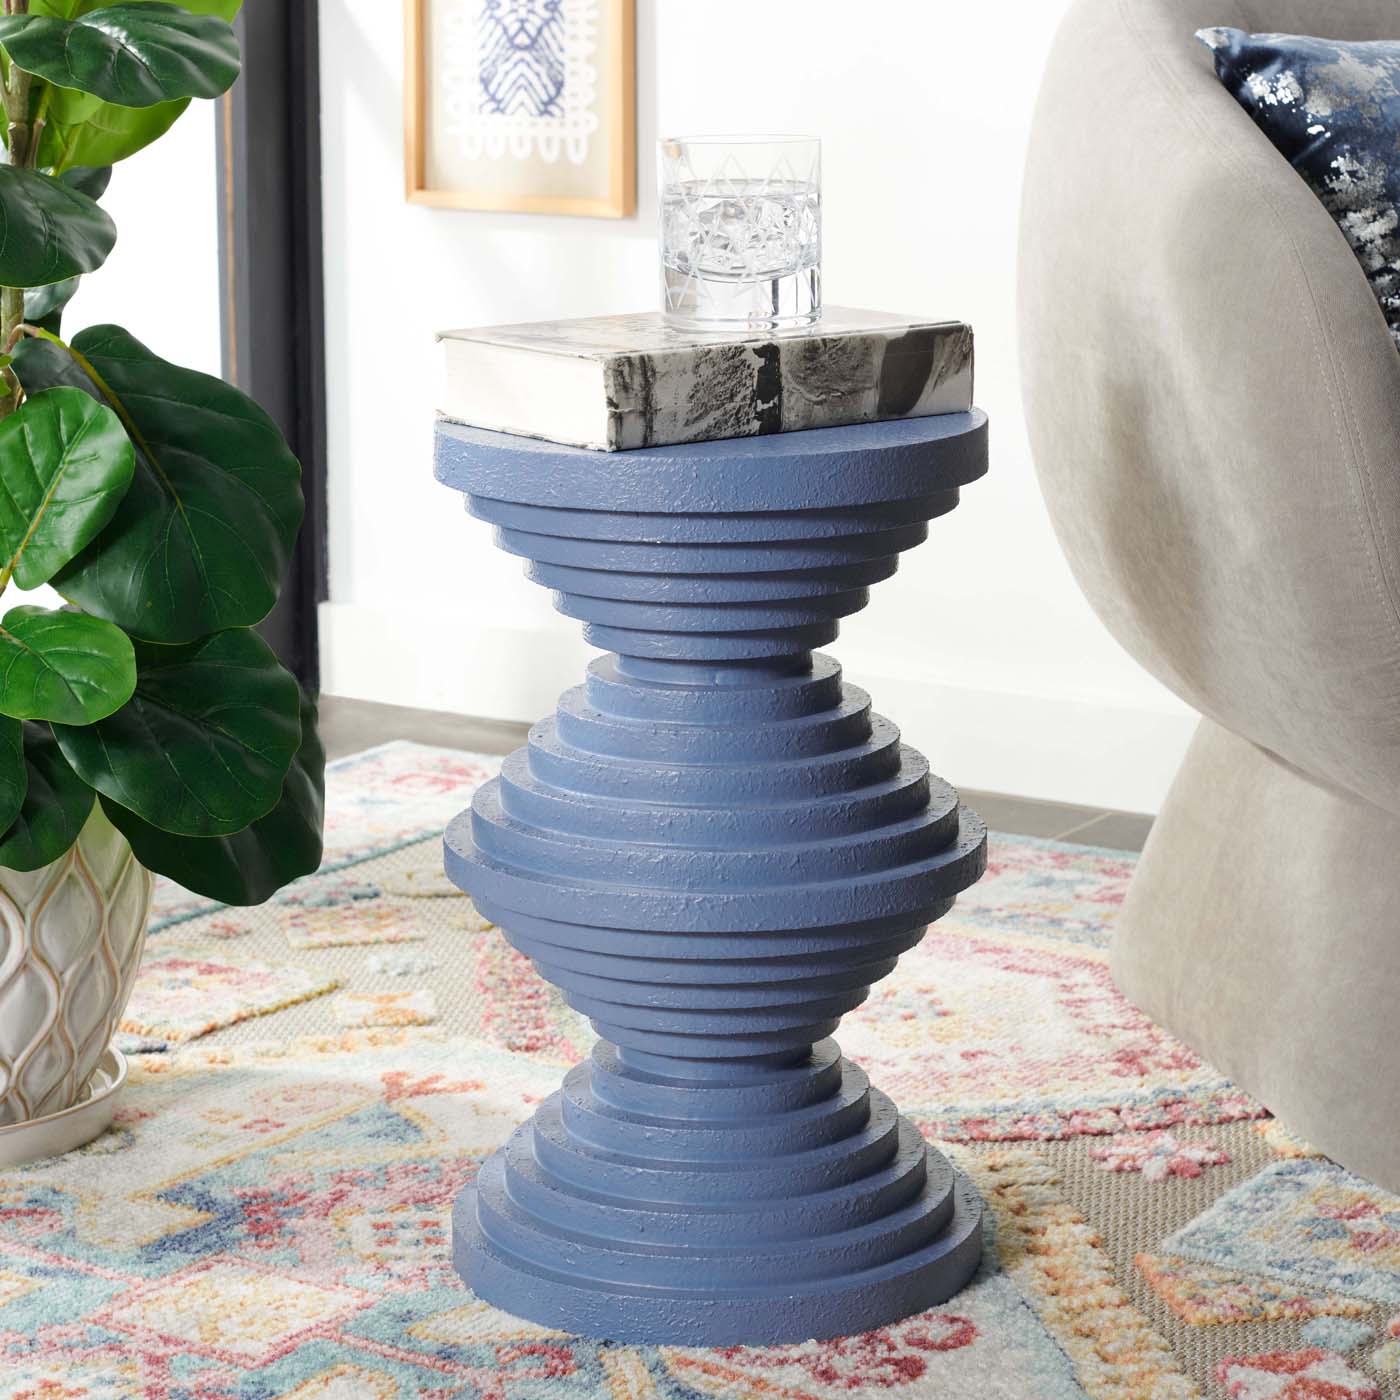 Safavieh Glynn Accent Table , ACC9708 - Perrywinkle